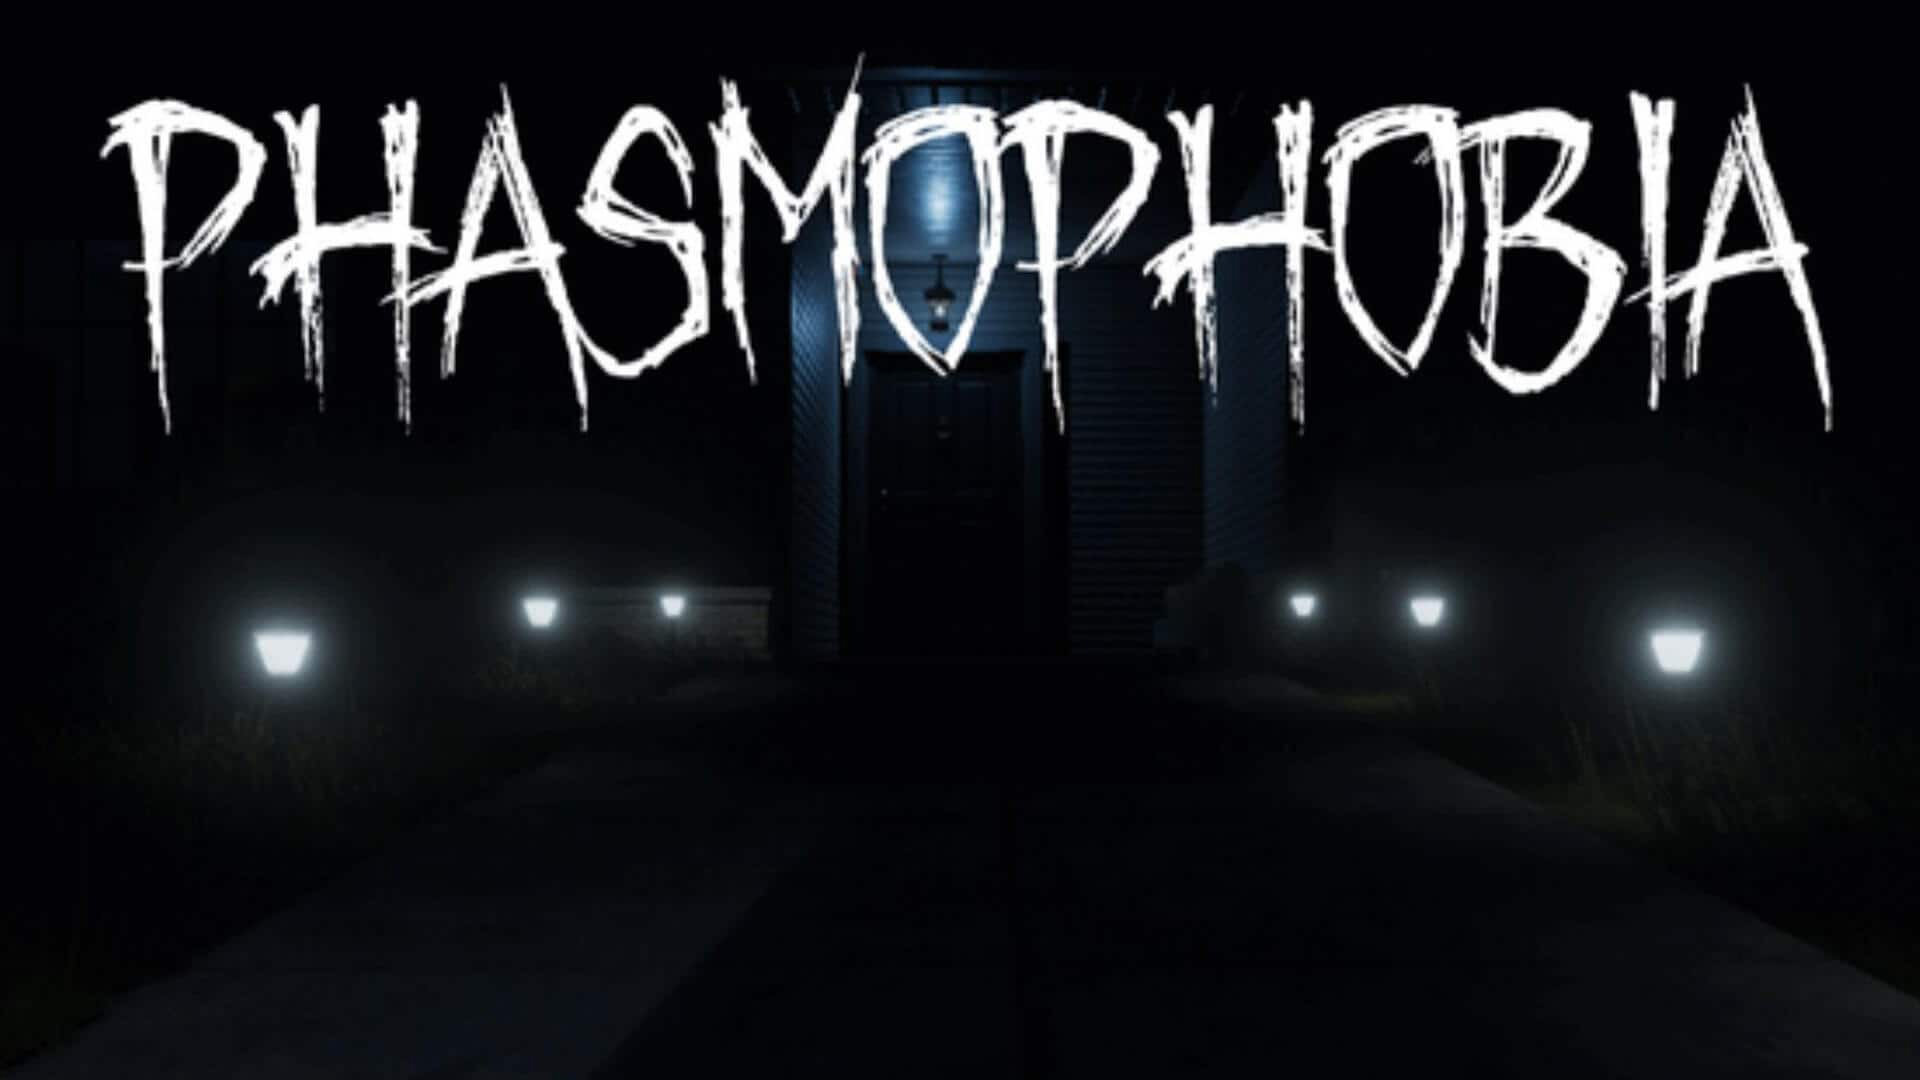 Phasmophobia Console Release When Will It Come To PlayStation & Xbox?